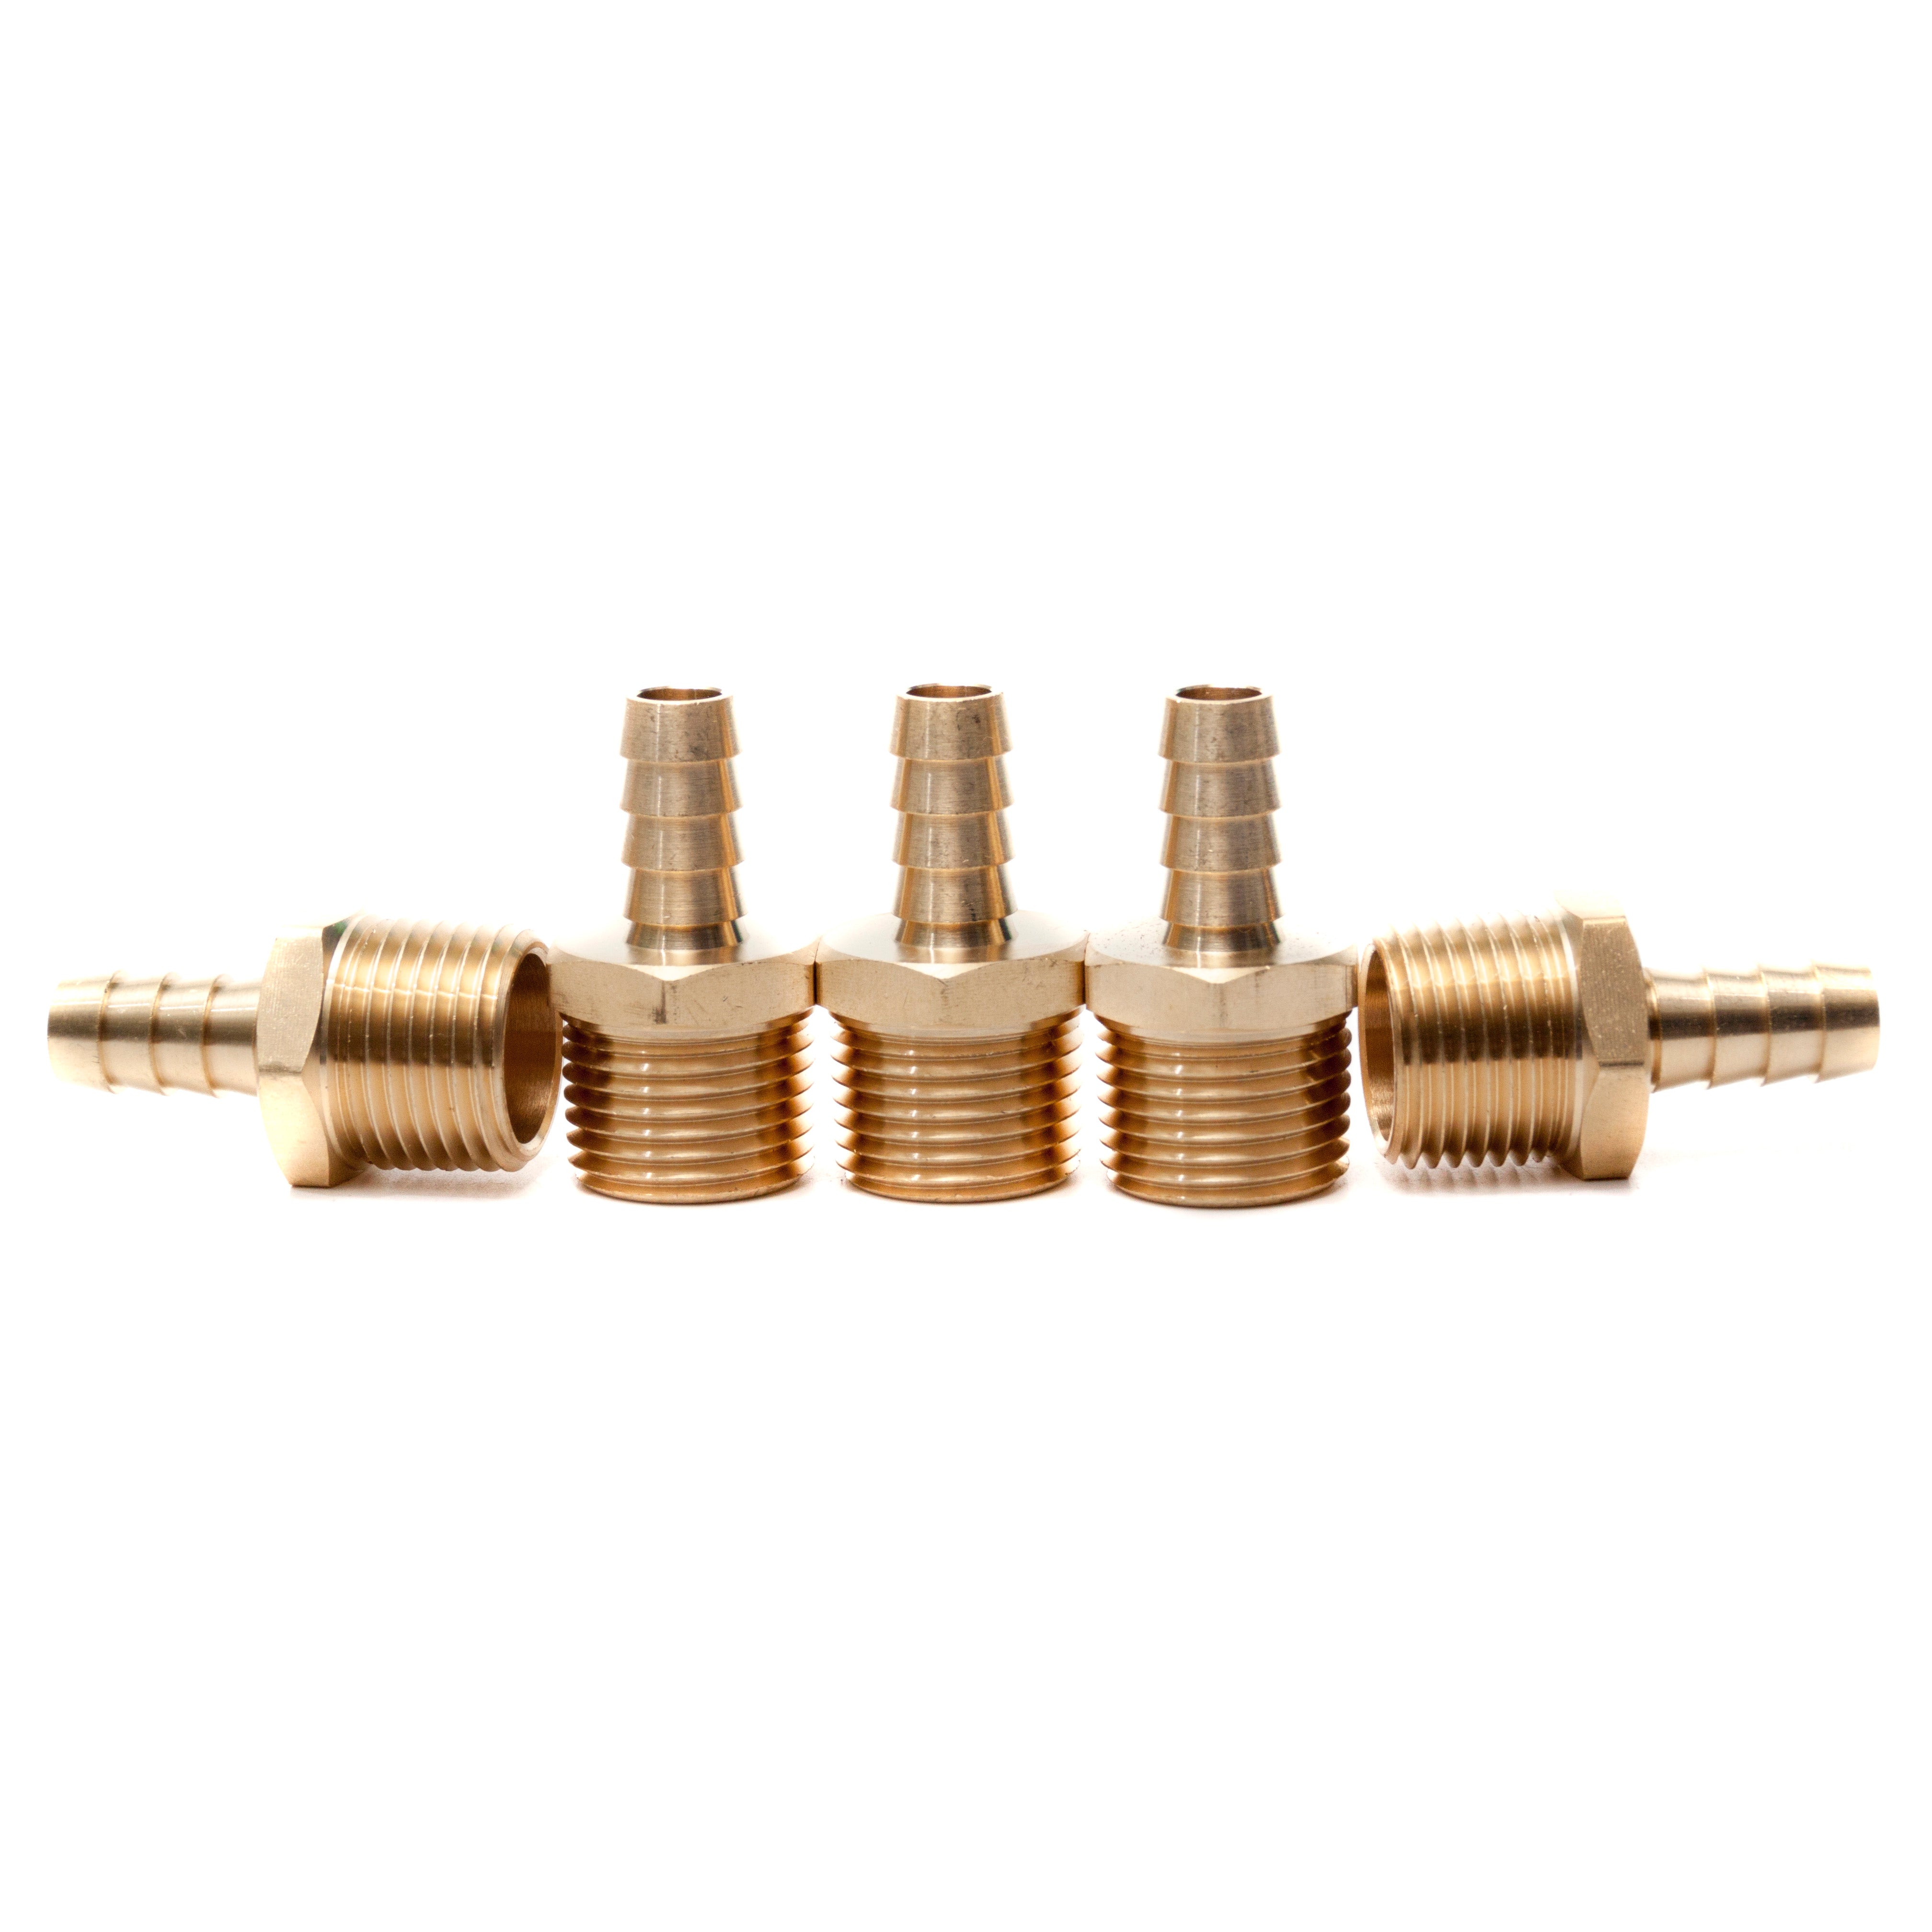 LTWFITTING Lead Free Brass Barbed Fitting Coupler/Connector 1/2 Inch Hose Barb x 1/4 Inch Male NPT Fuel Gas Water (Pack of 5)